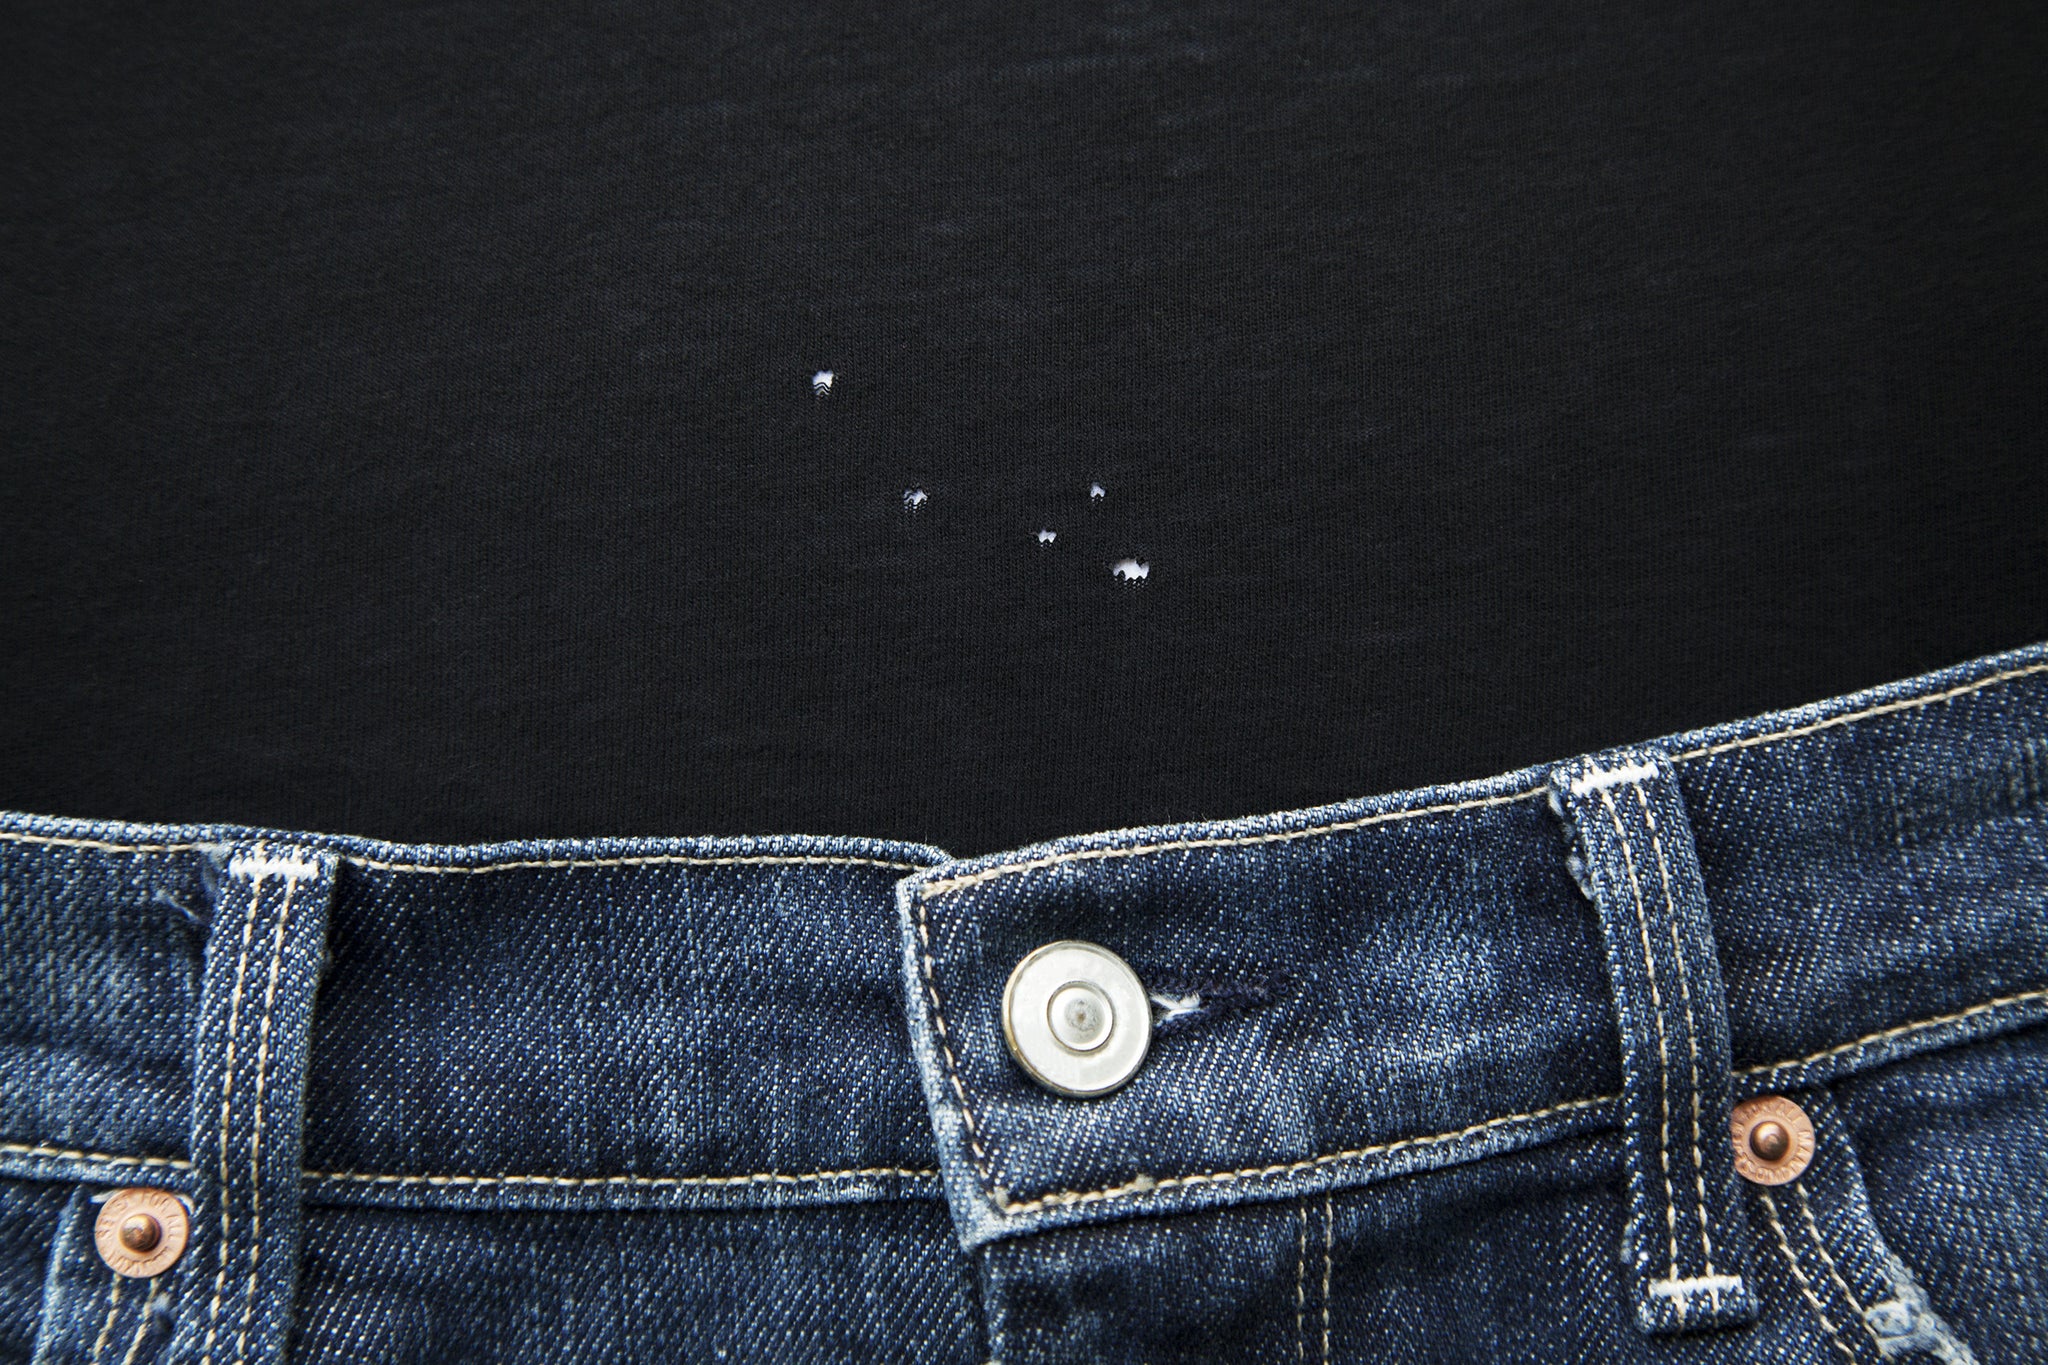 Why Do I Get Tiny Holes In My Shirts? You Can Ask Google Or Read Here...